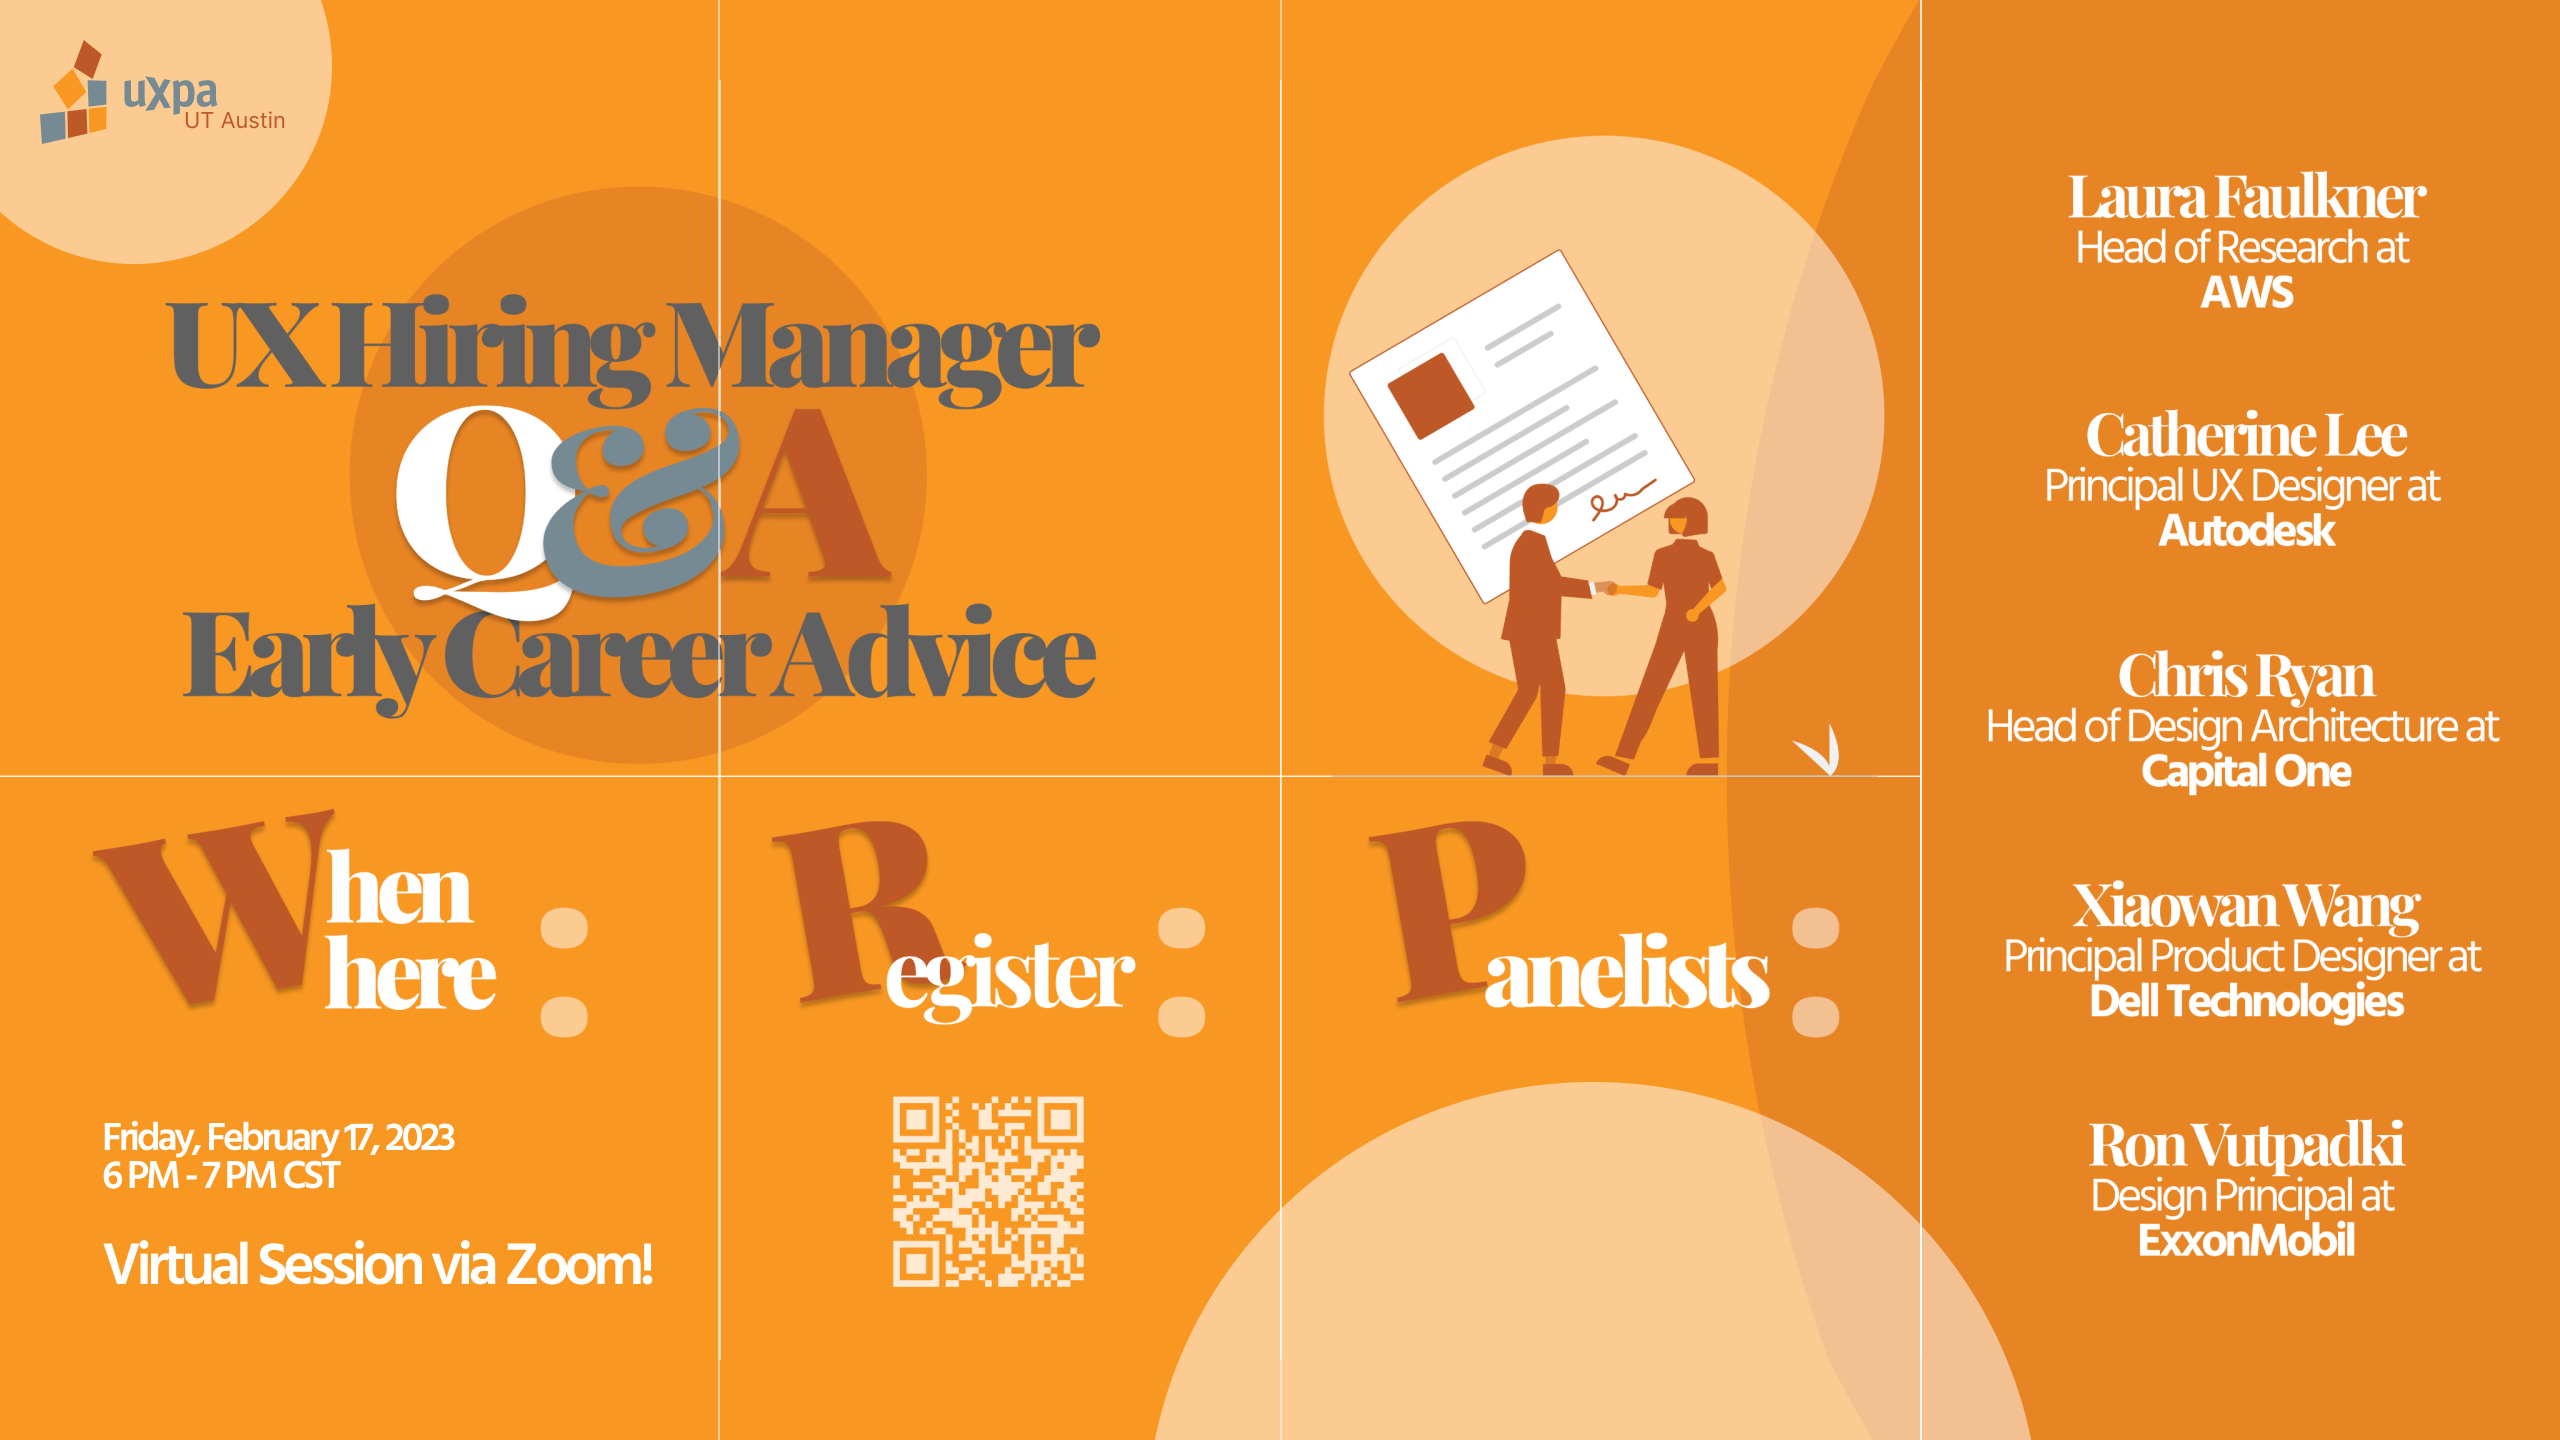 UX Hiring Manager Q&A Event